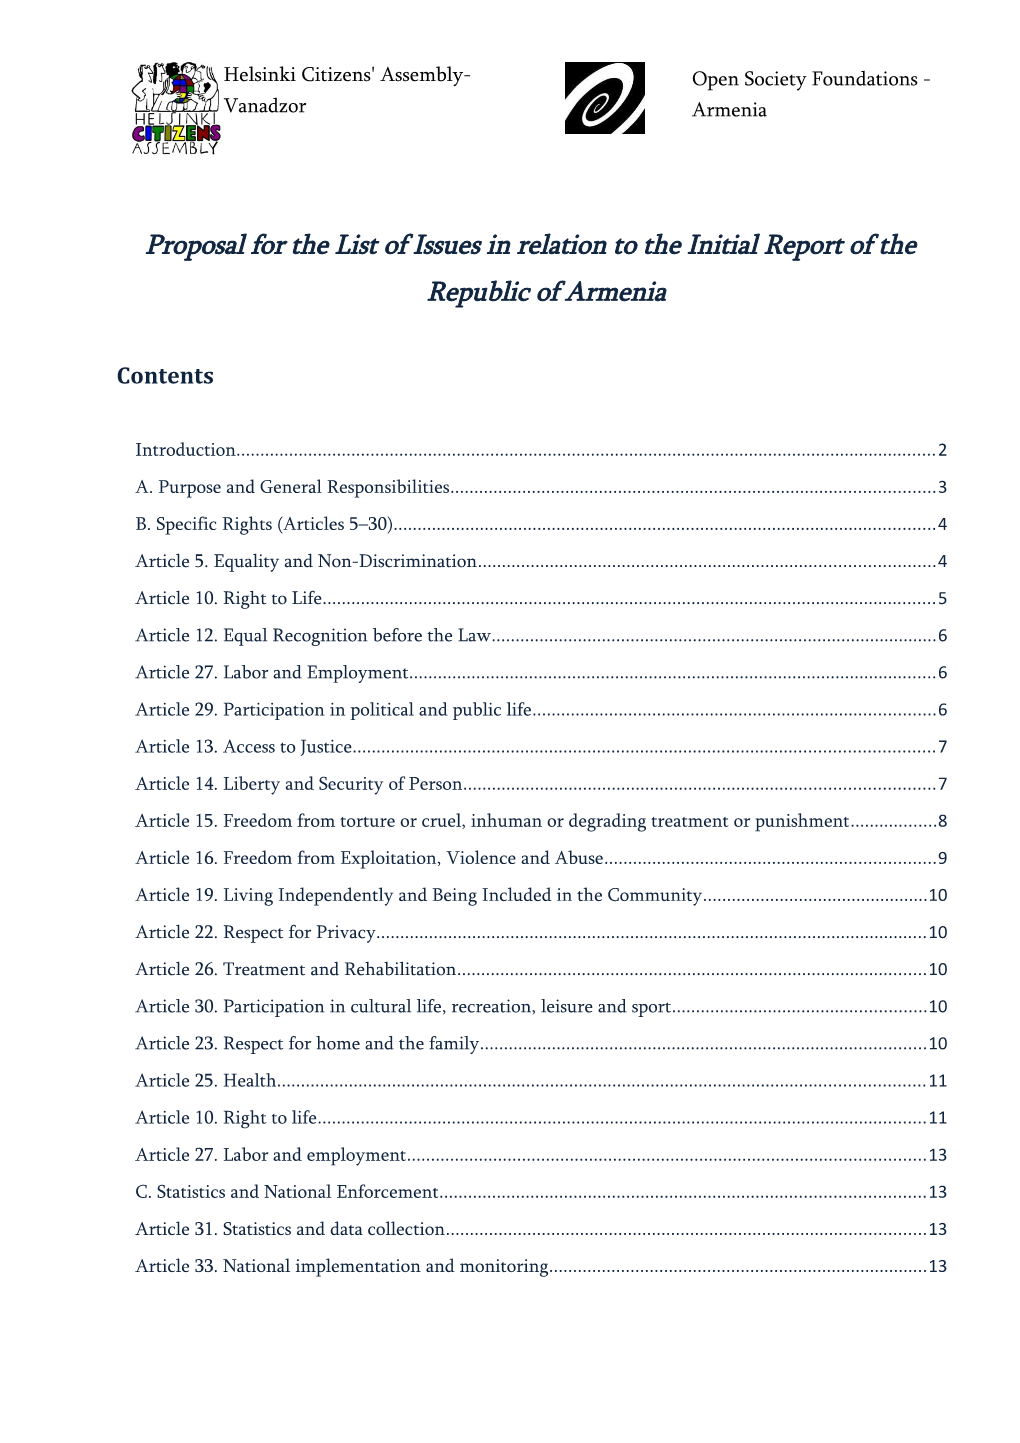 Proposal for the List of Issues in Relation to the Initial Report of the Republic of Armenia